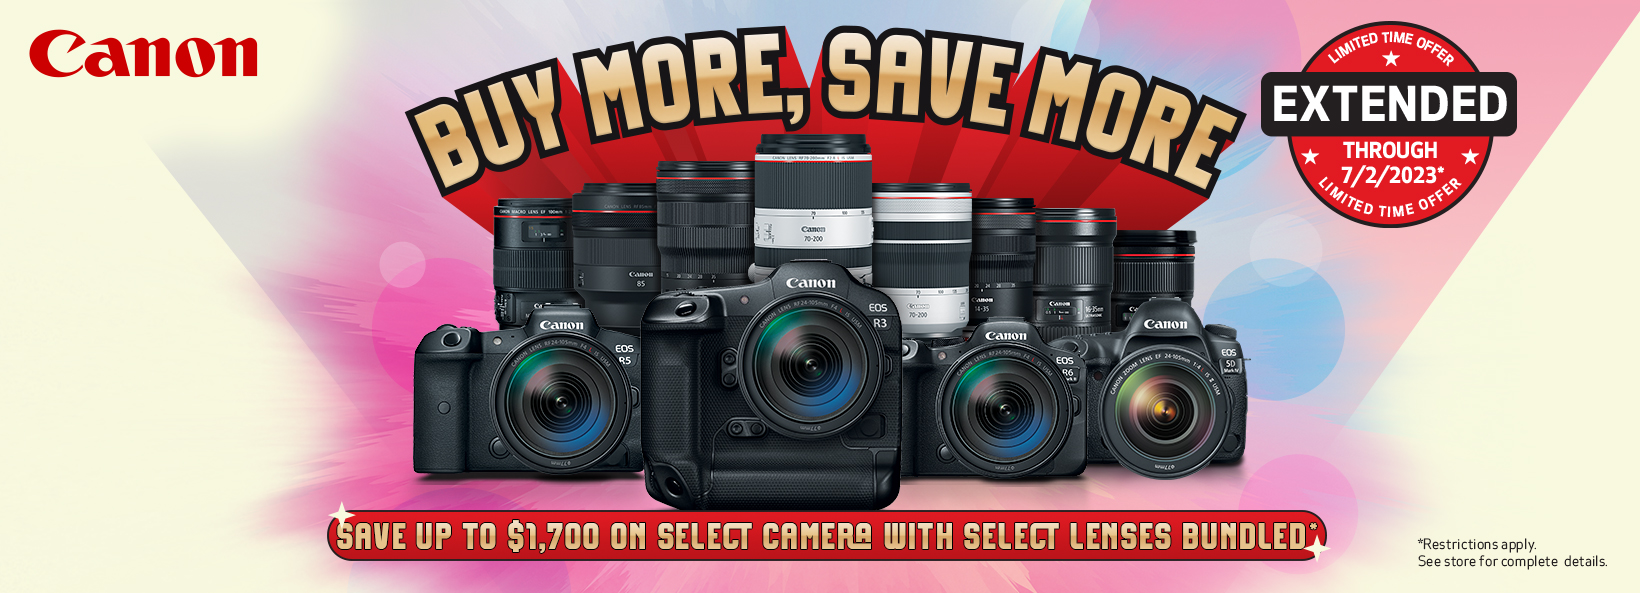 Canon Buy More, Save More